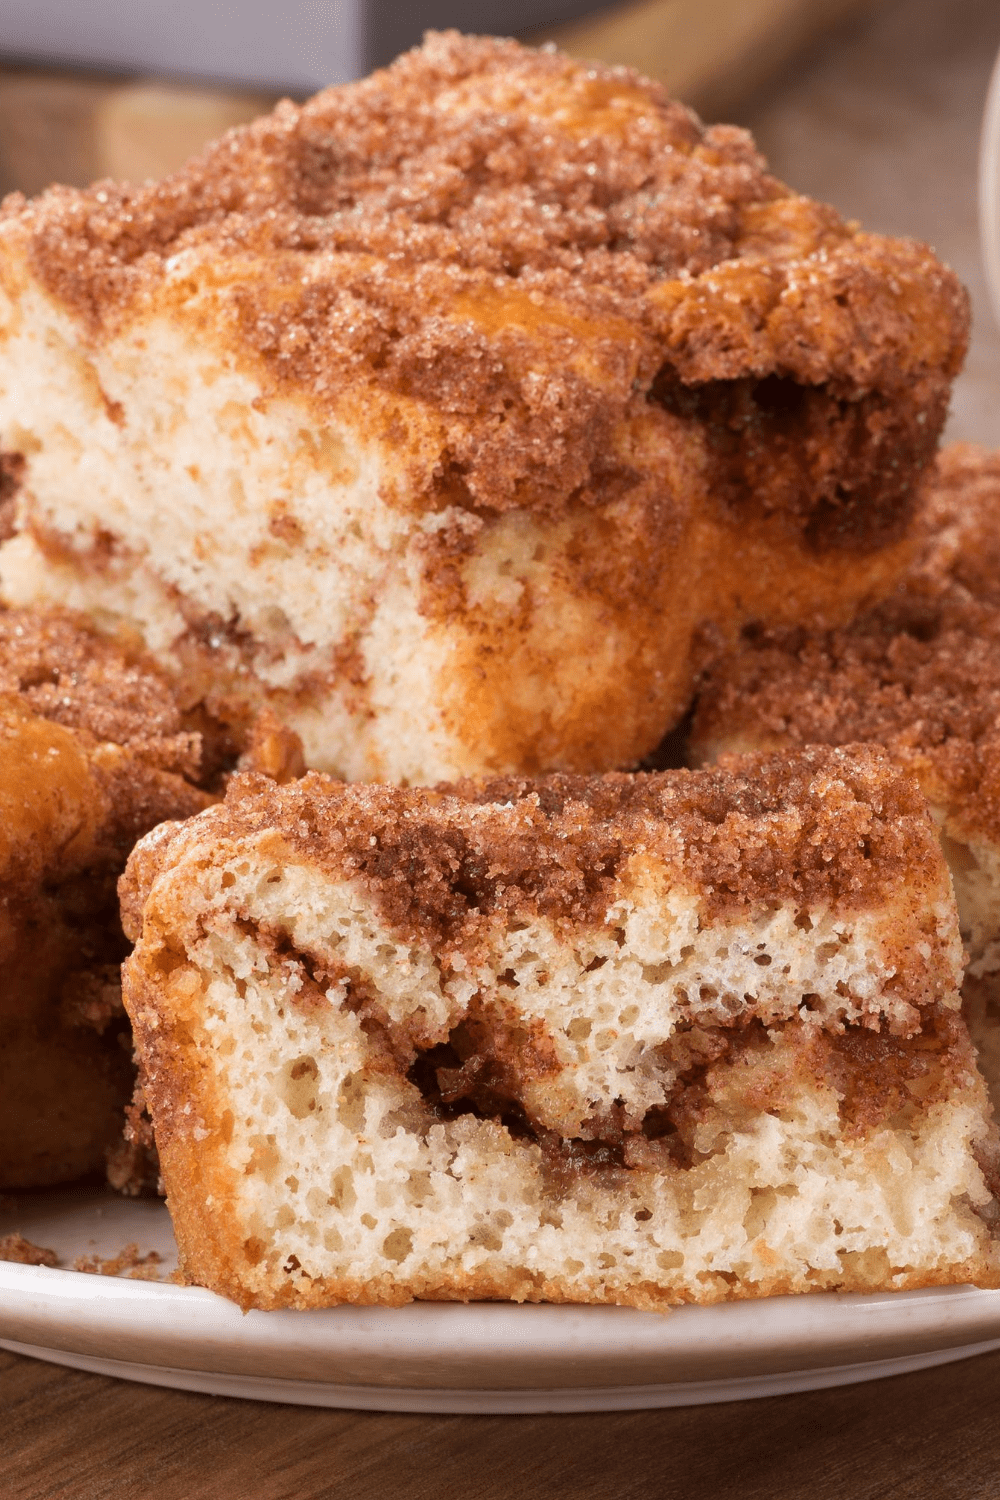 Slices of Bisquick Coffee Cake